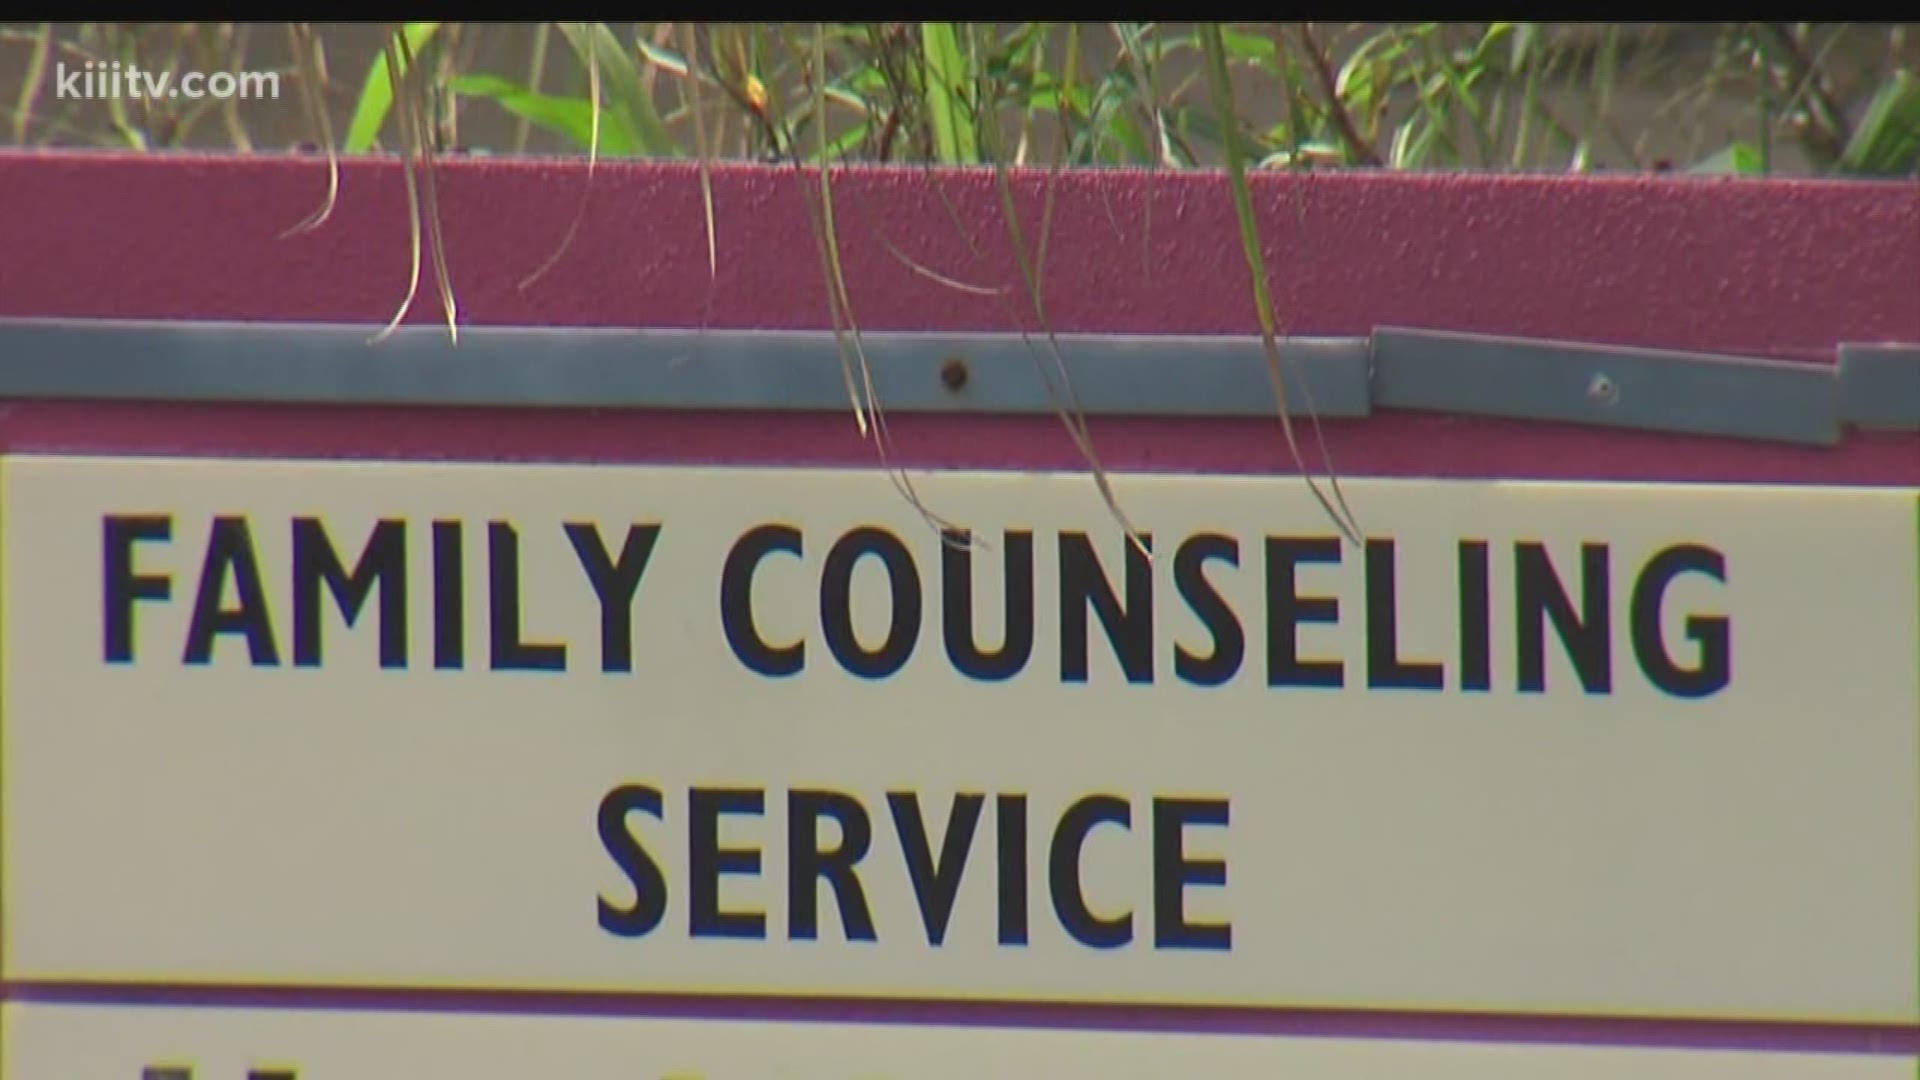 Family Counseling Services is just one of the 50 agencies that depend on your support to provide services to those in need in the Coastal Bend.